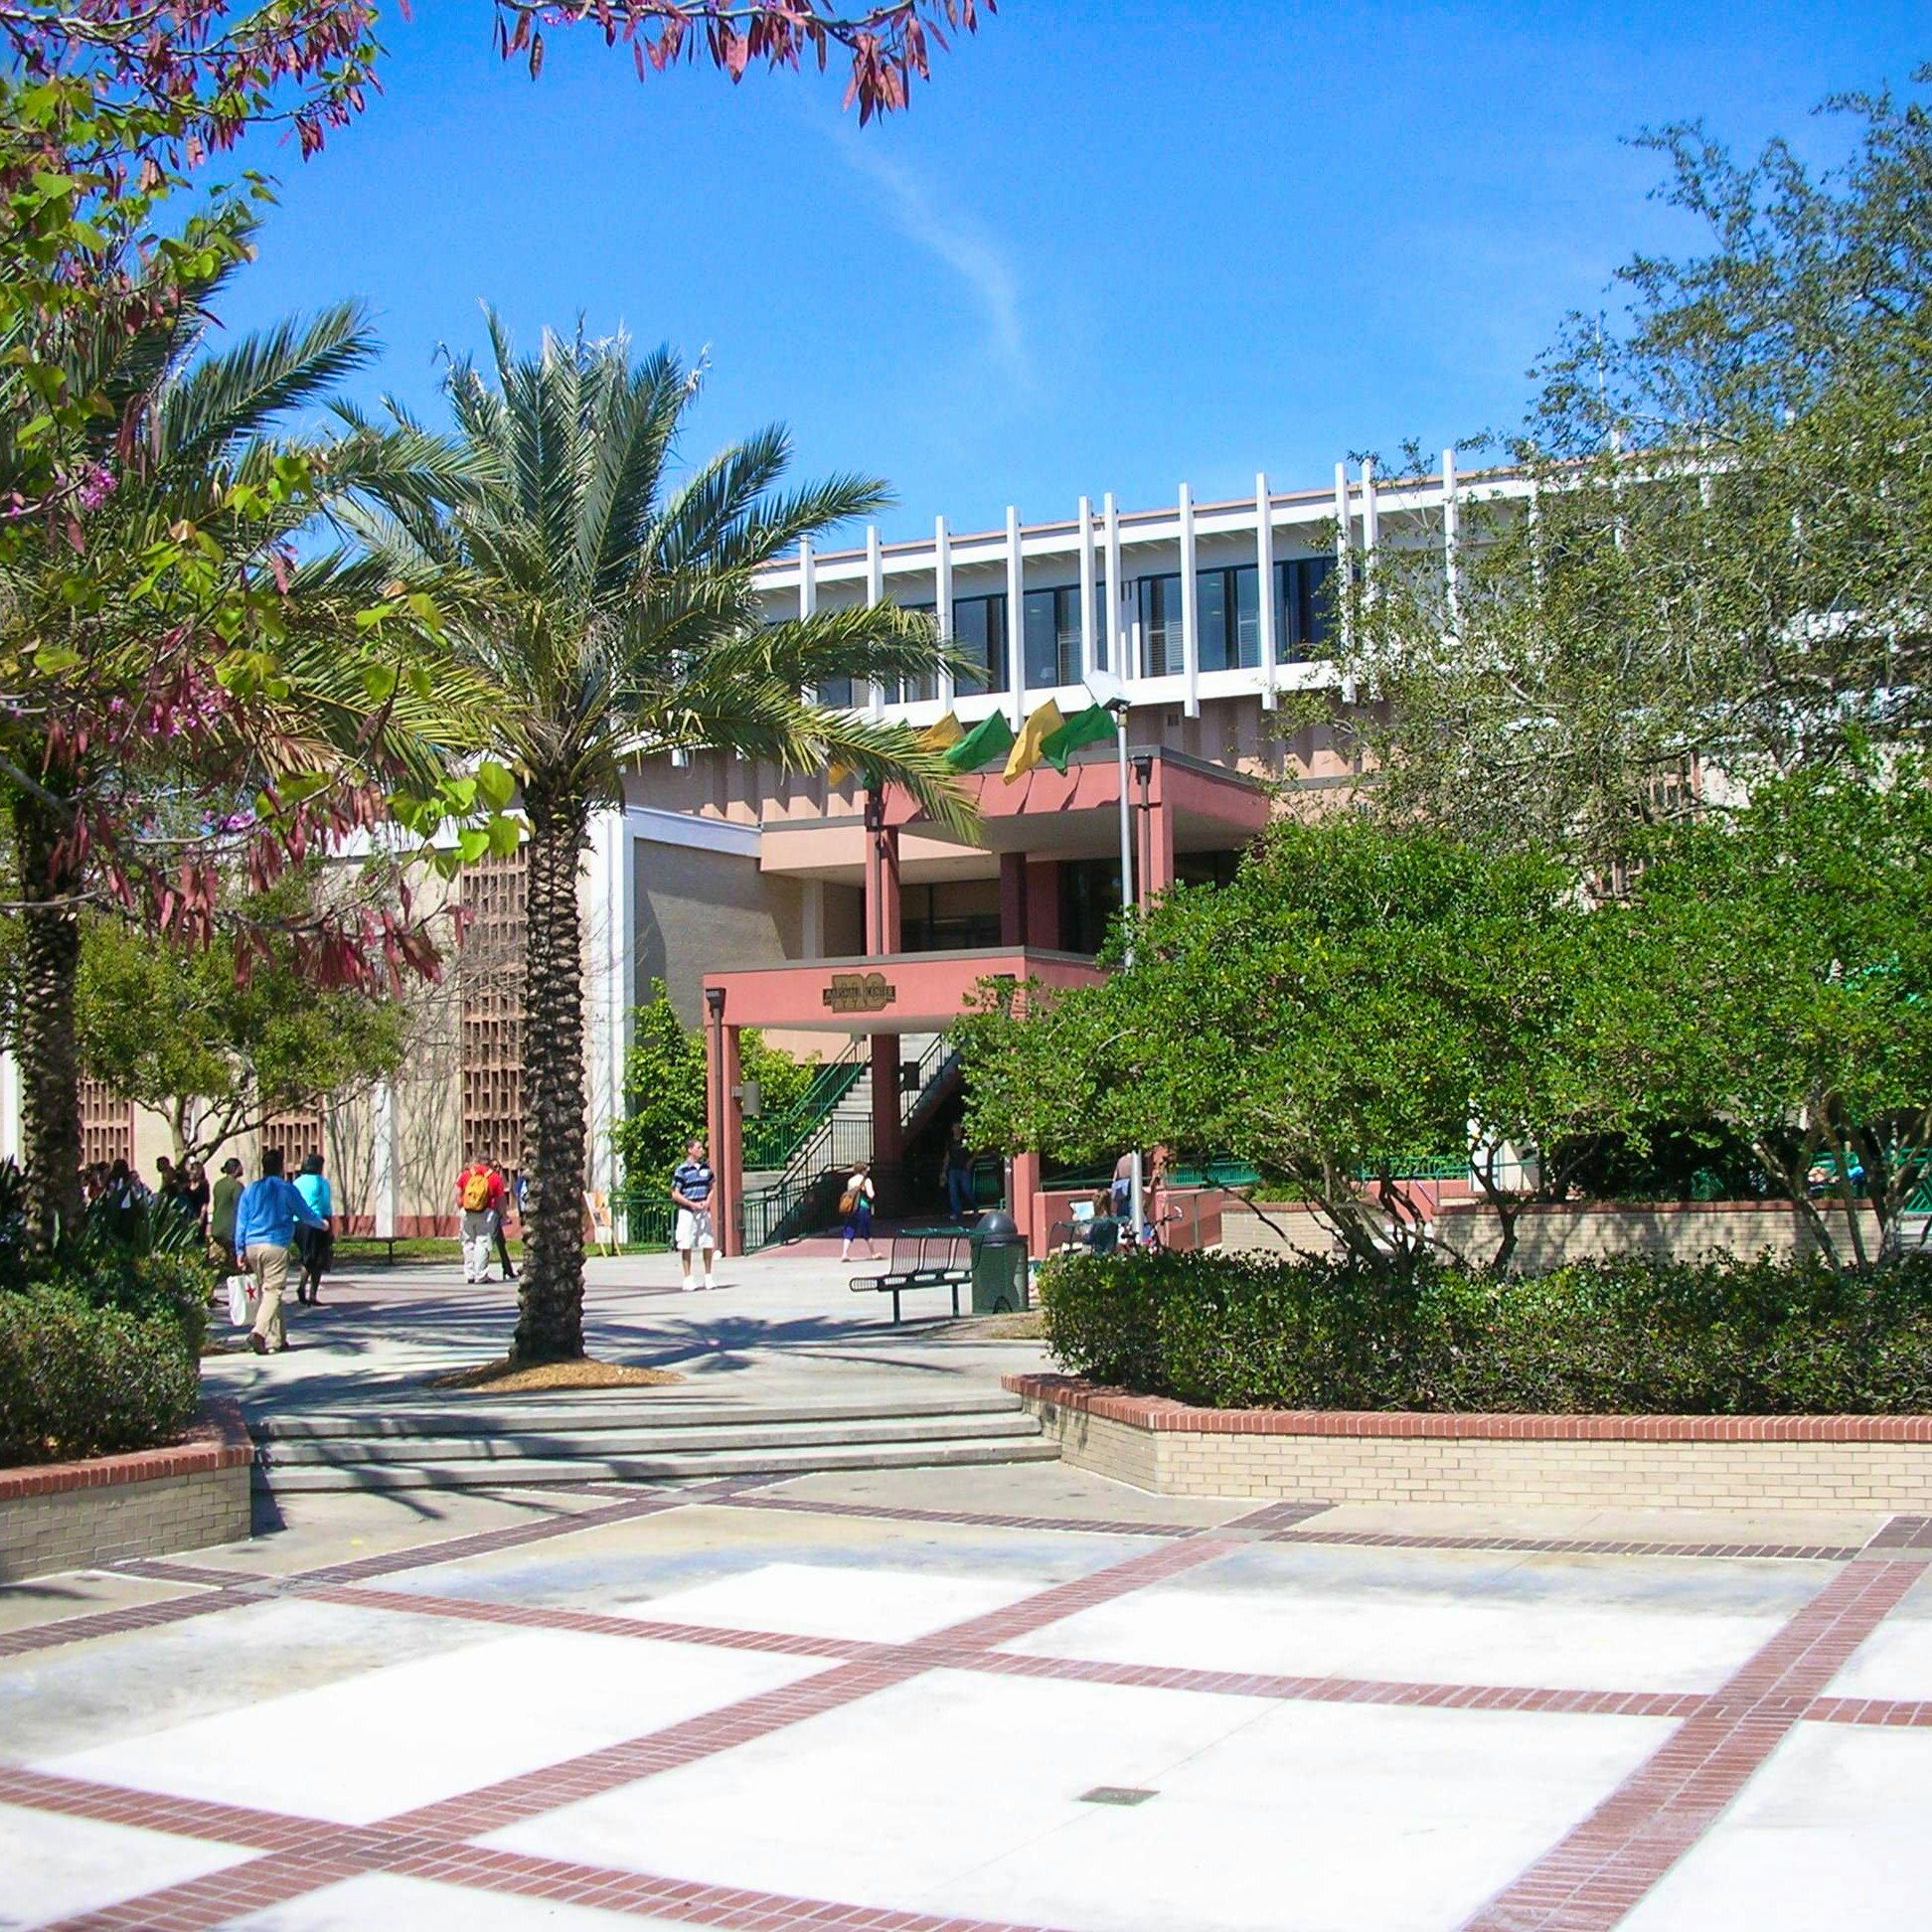 University of South Florida Main Campus - Admission Requirements, SAT, ACT,  GPA and chance of acceptance